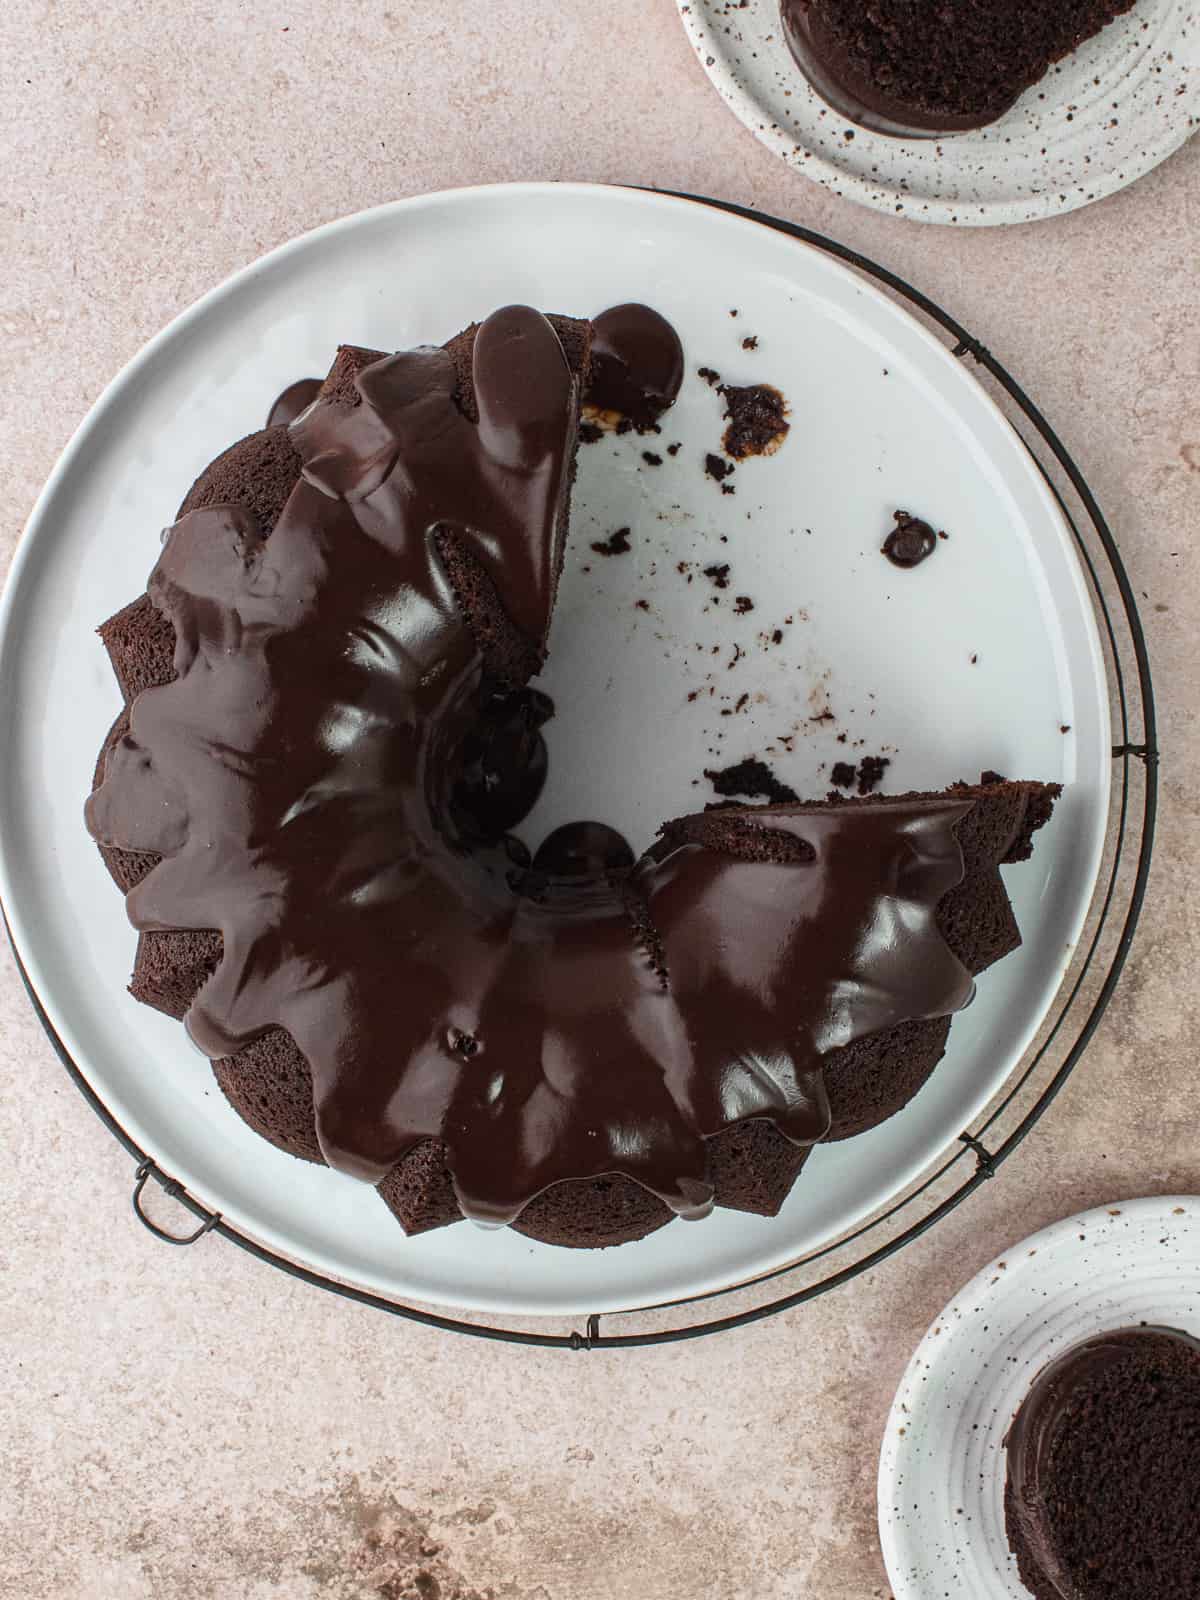 Chocolate olive oil bundt cake with chocolate ganache and plates of cake